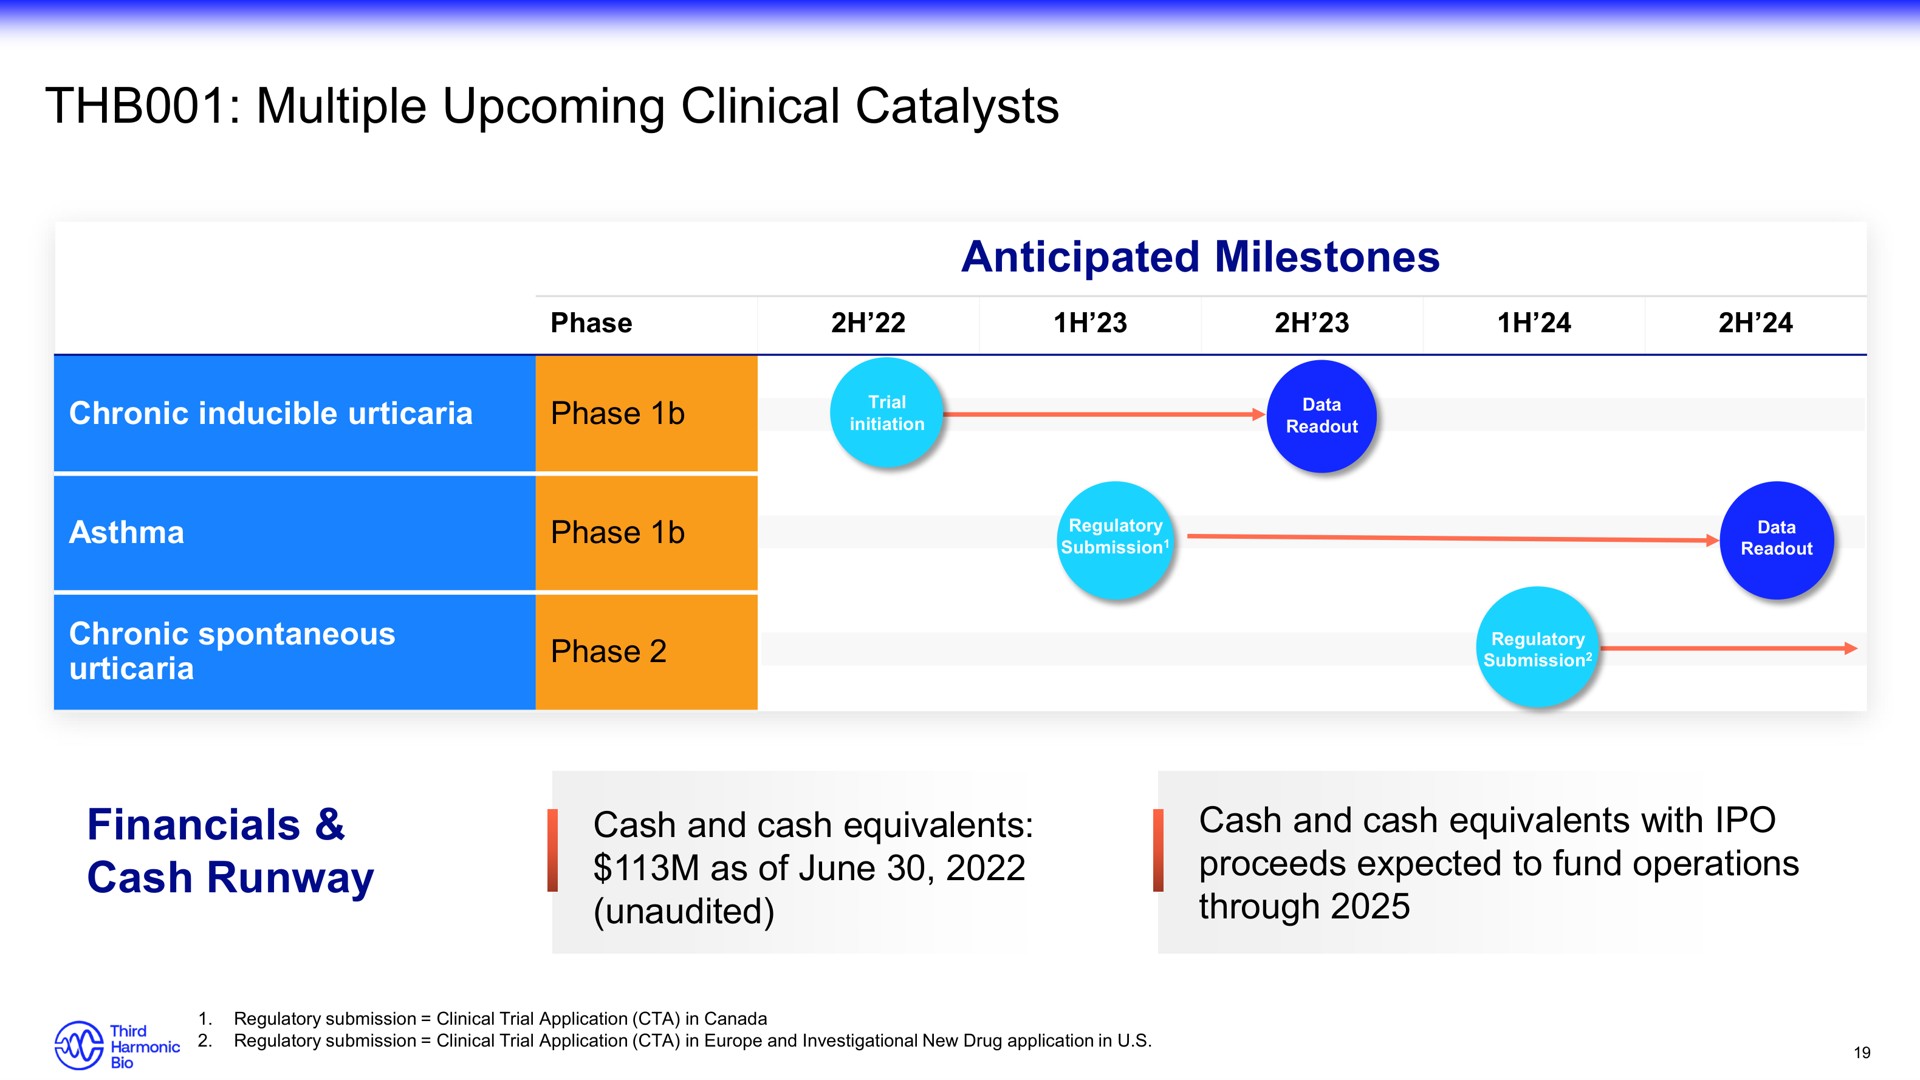 multiple upcoming clinical catalysts | Third Harmonic Bio